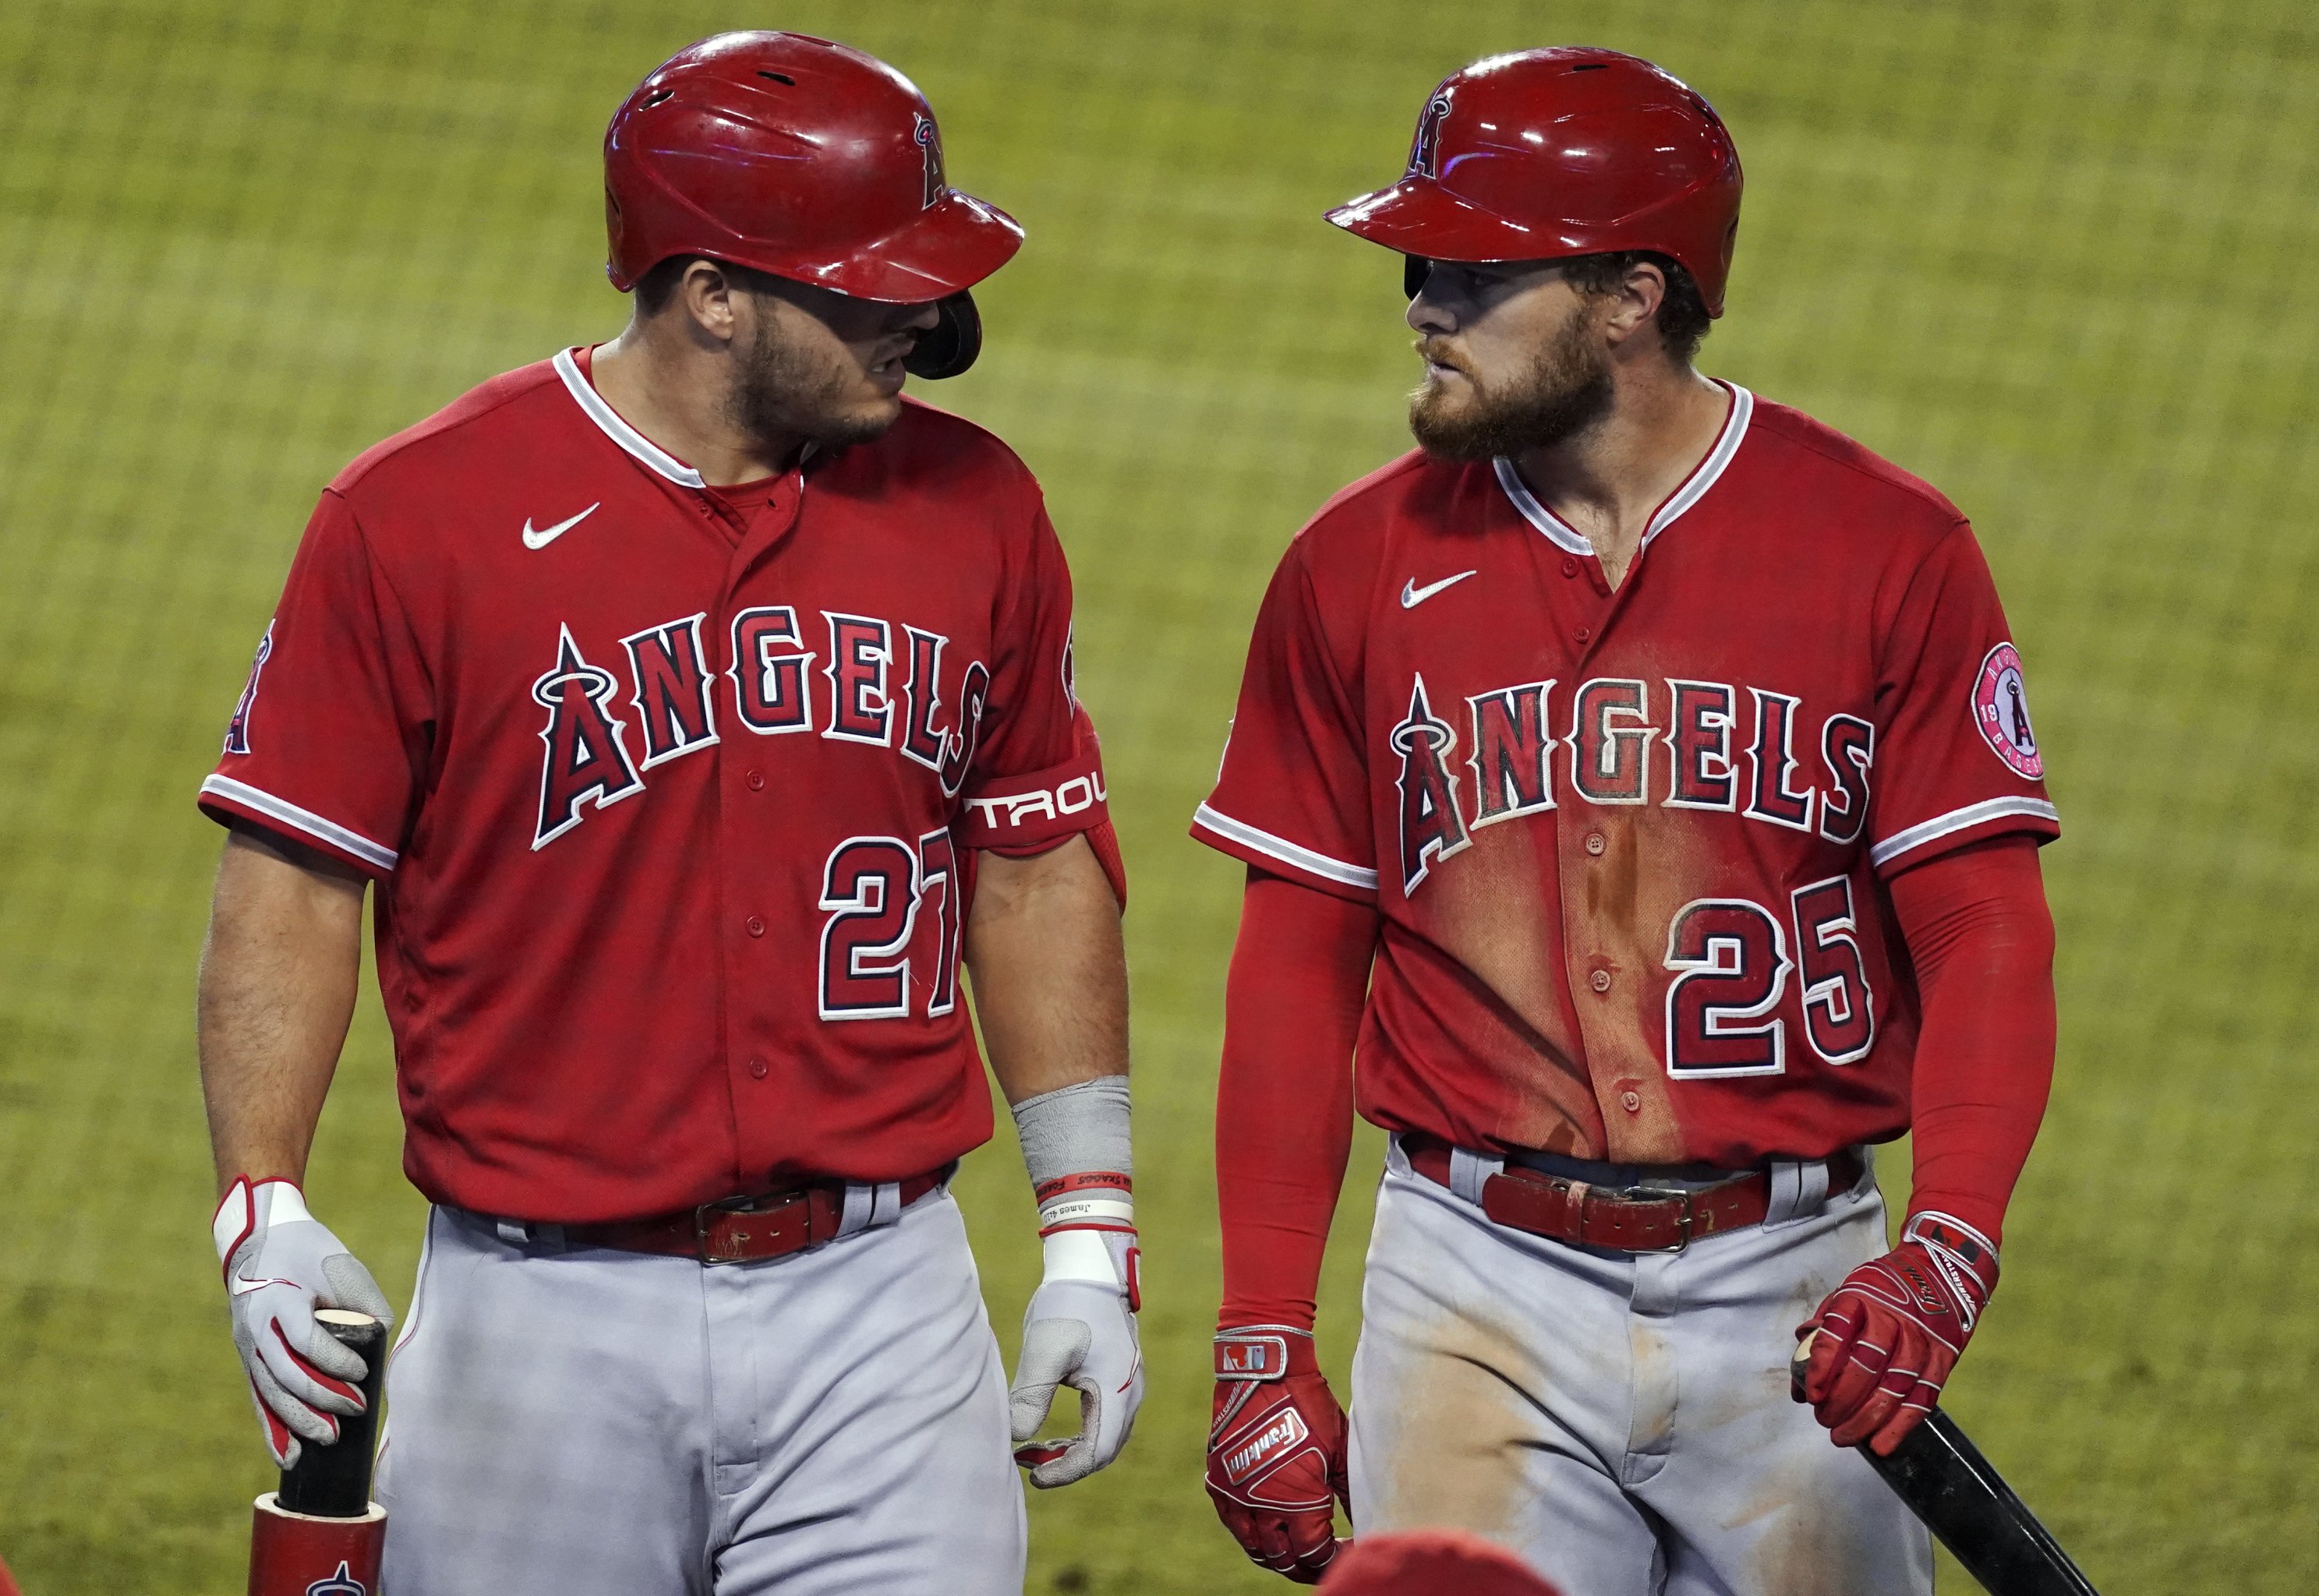 Mike Trout mulling over whether to play in MLB All-Star Game - Los